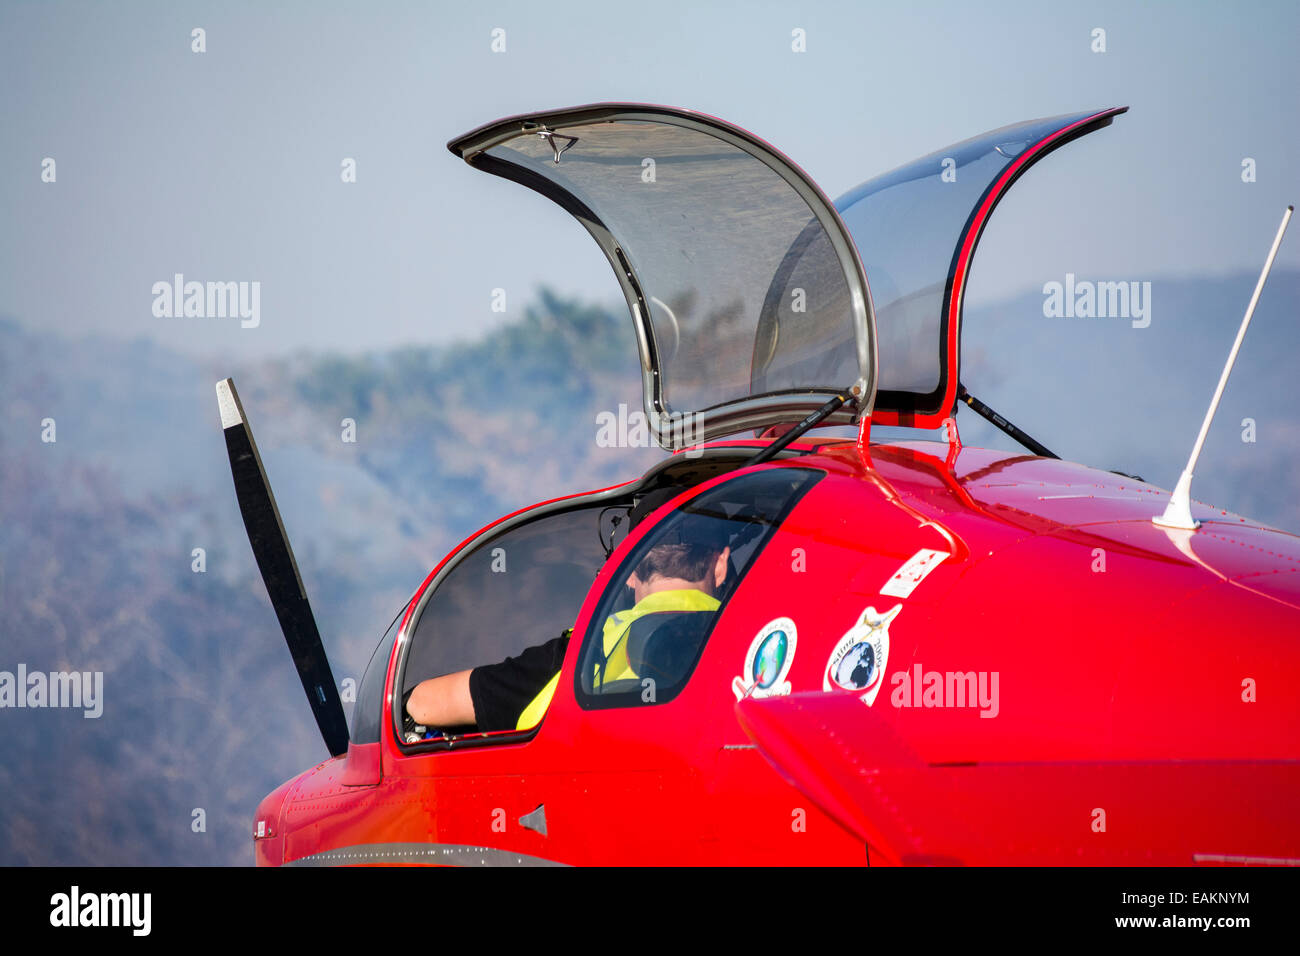 Pilot sitting inside his light aircraft with the doors open Stock Photo